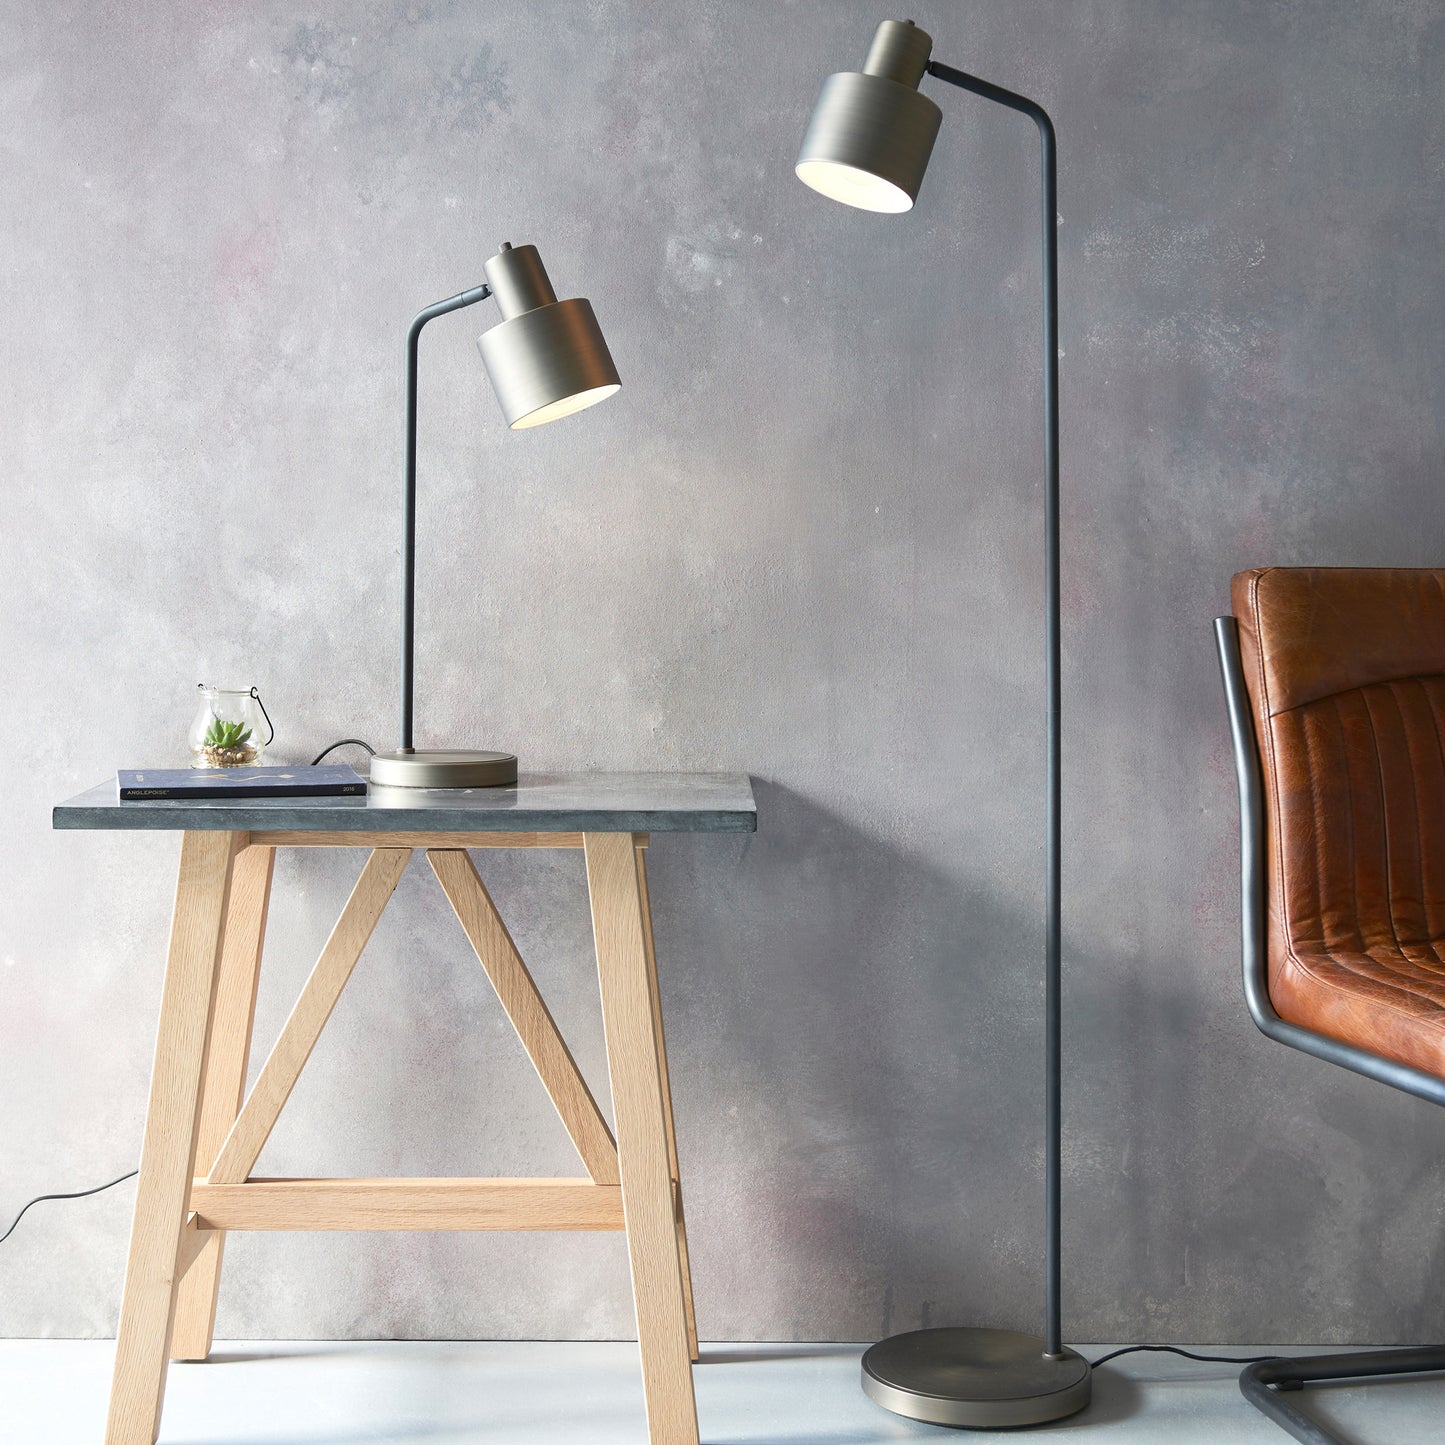 A table with a leather chair and a Mayfield Floor Lamp for interior decor.